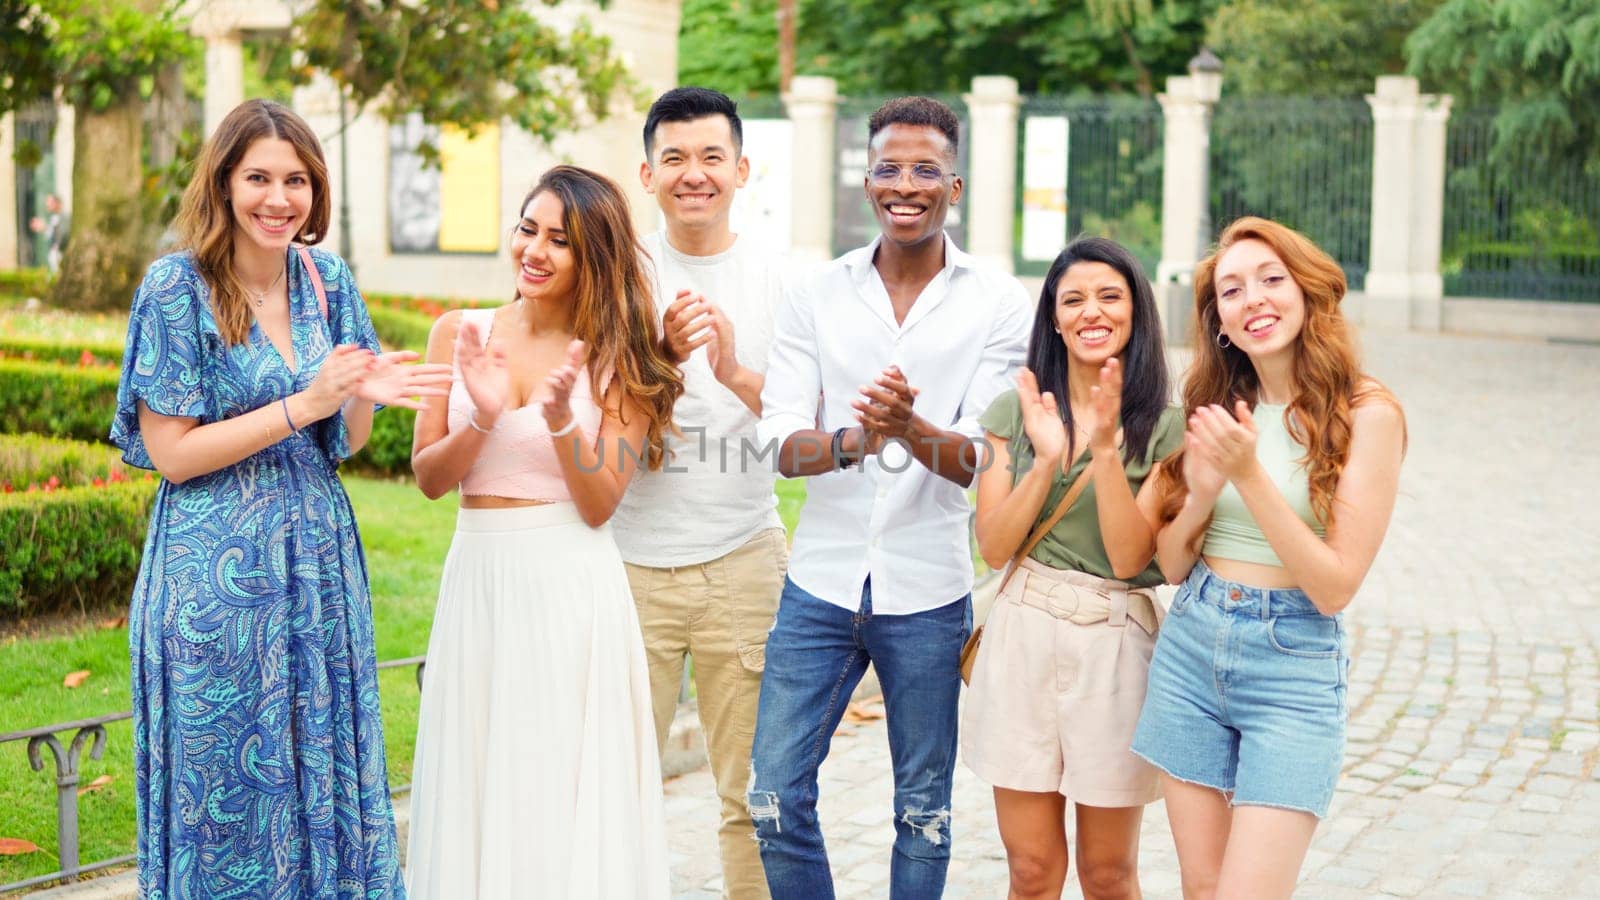 Group of multiethnic friends applauding while looking at the camera outdoors